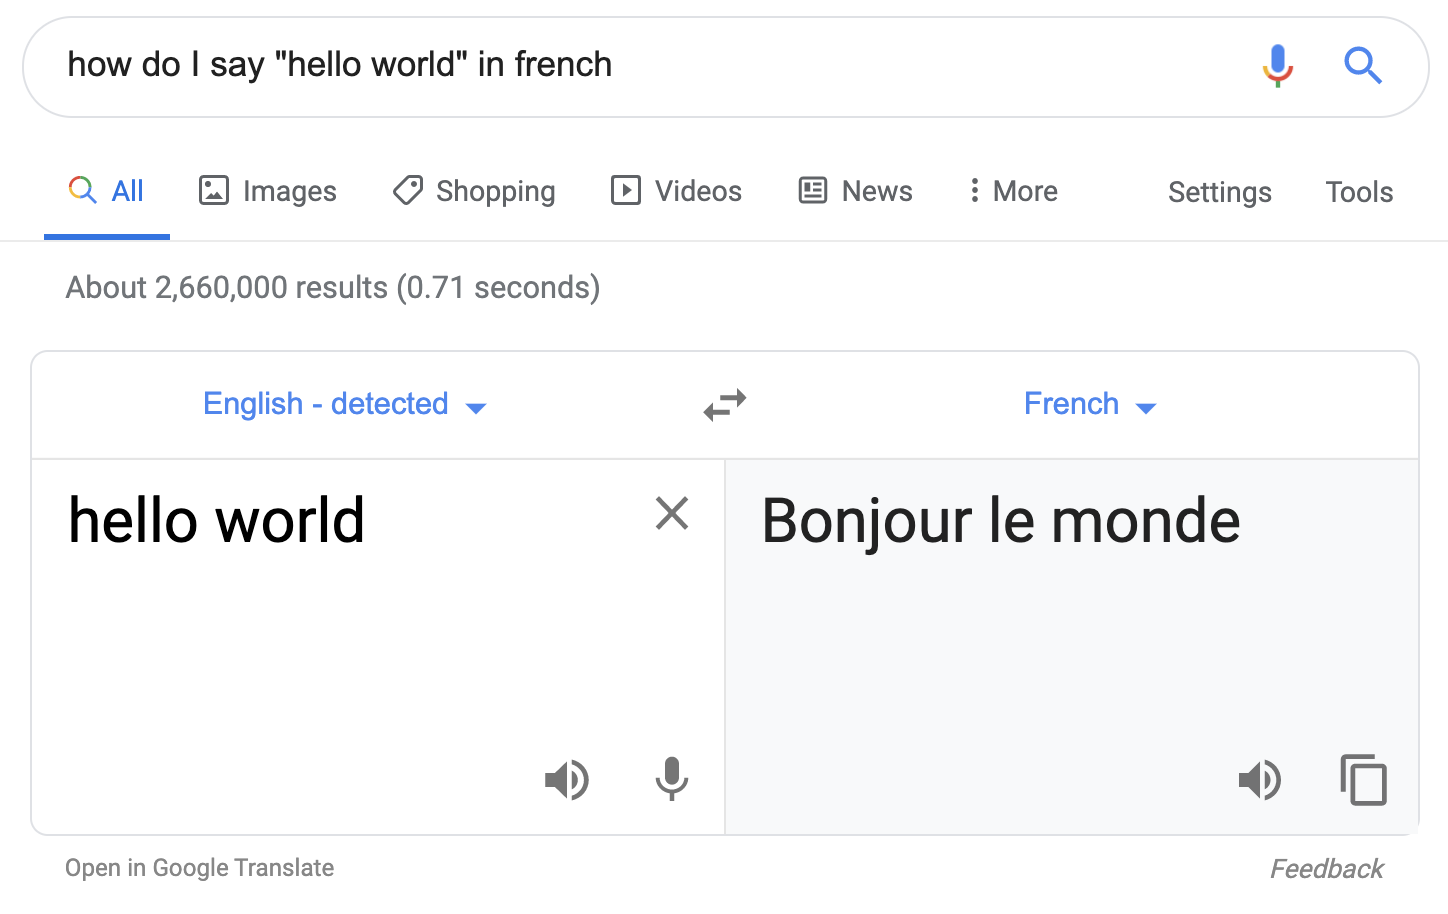 You can use Google’s translation models through Search (above), in the Translate app, or in your _own_ apps using the Google Cloud Translate API.